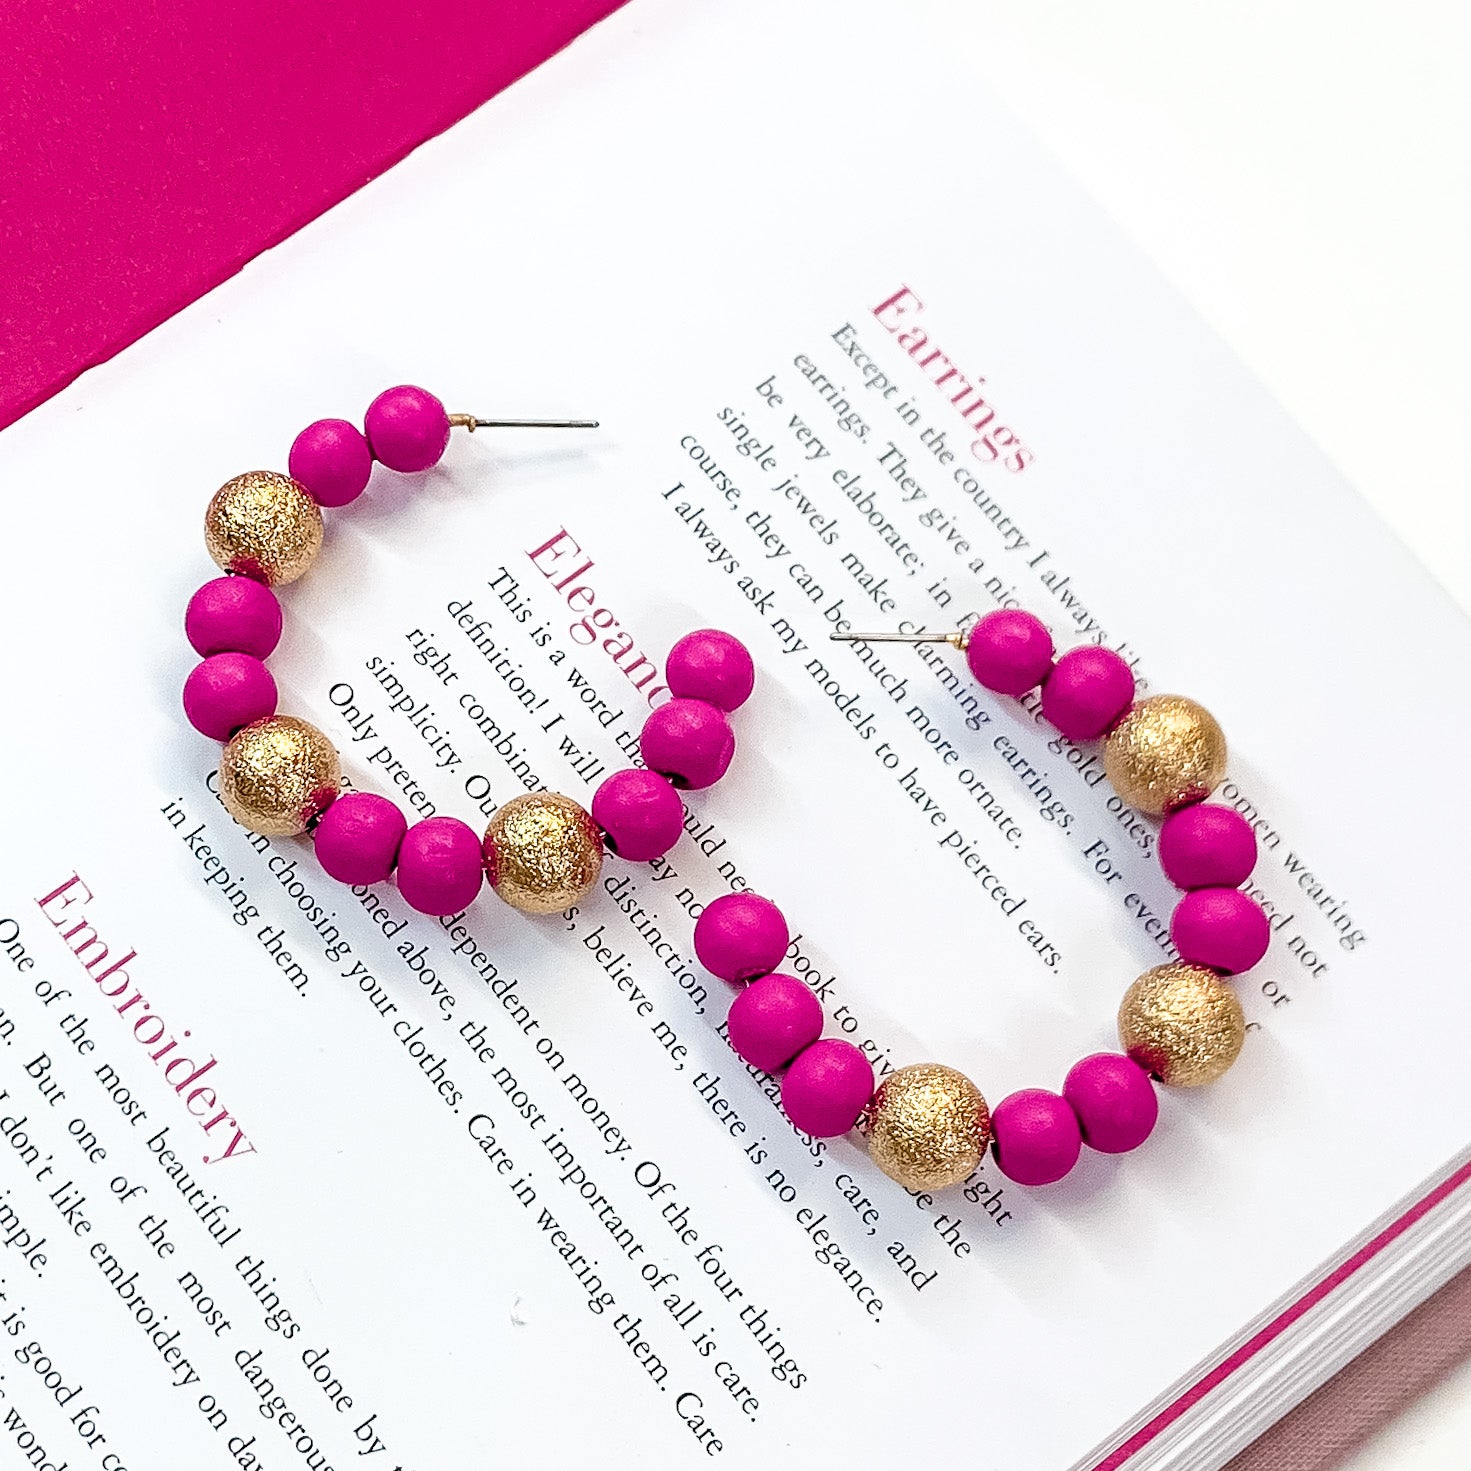 Pictured on an open book is a pair of fuchsia beaded hoop earrings with gold beaded spacers.